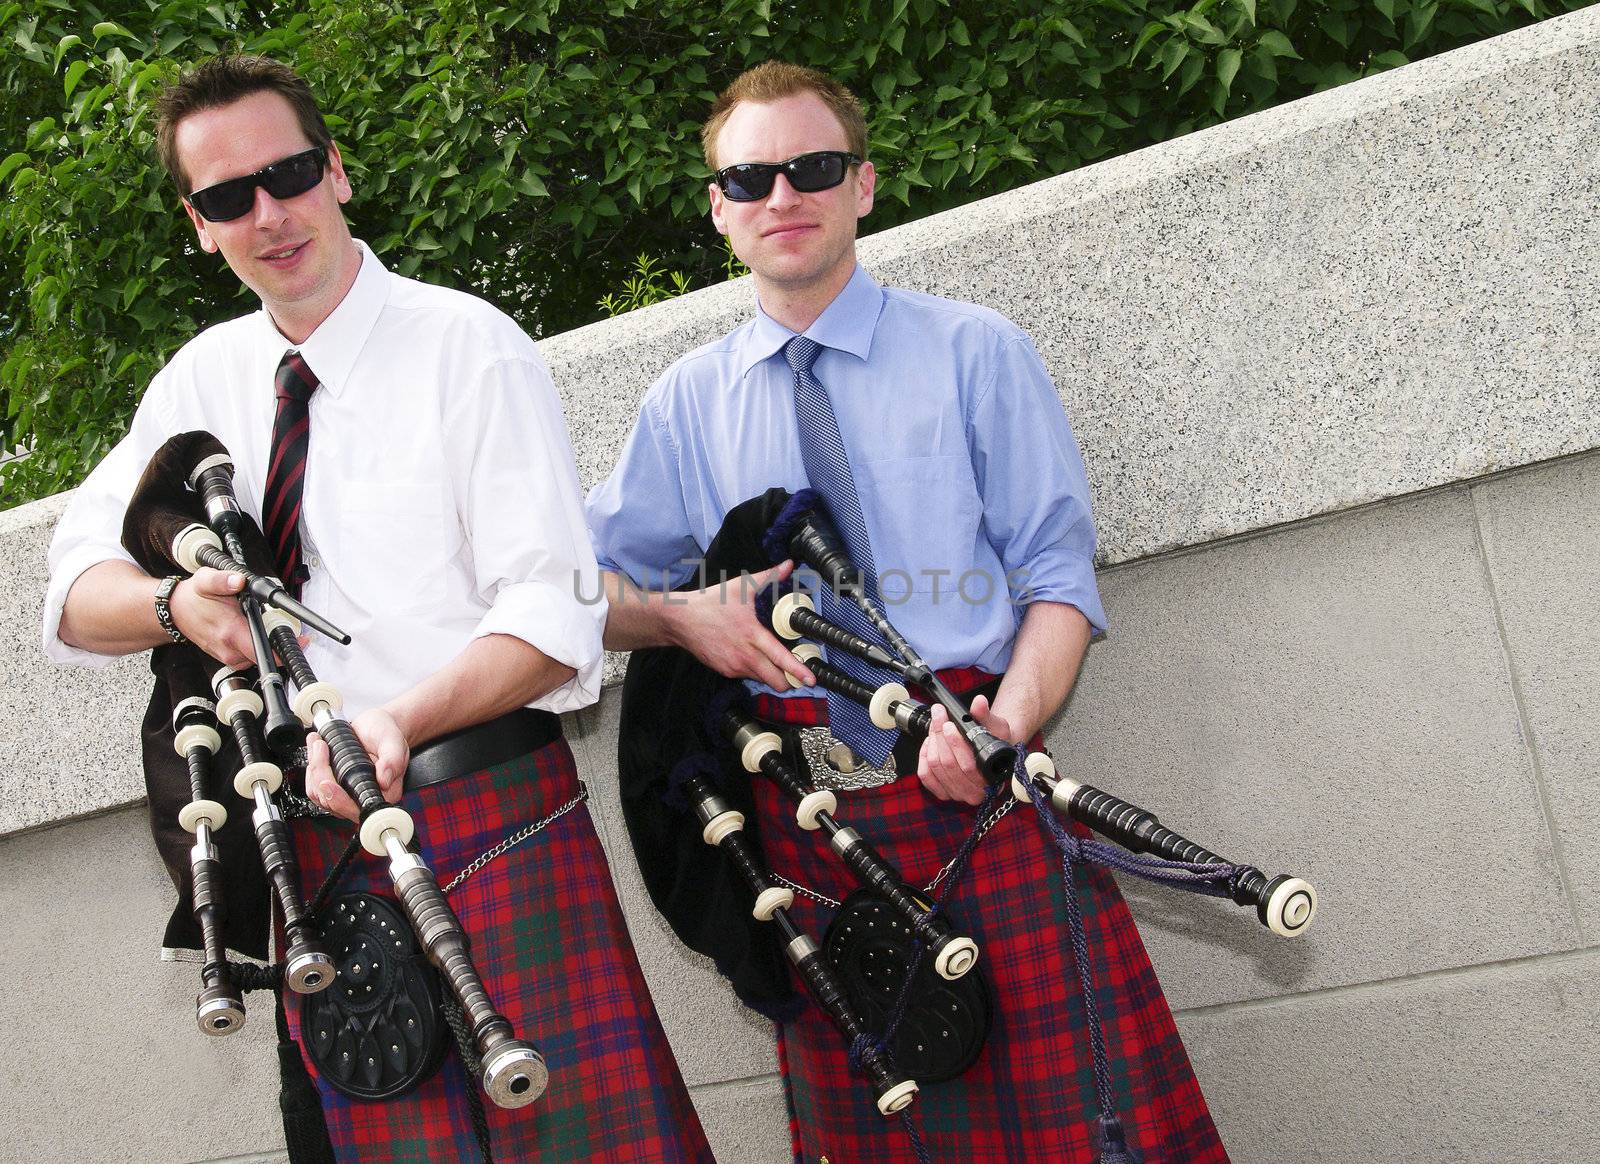 Bagpipe duo relaxing between songs as they entertain tourists in Ottawa, Canada.